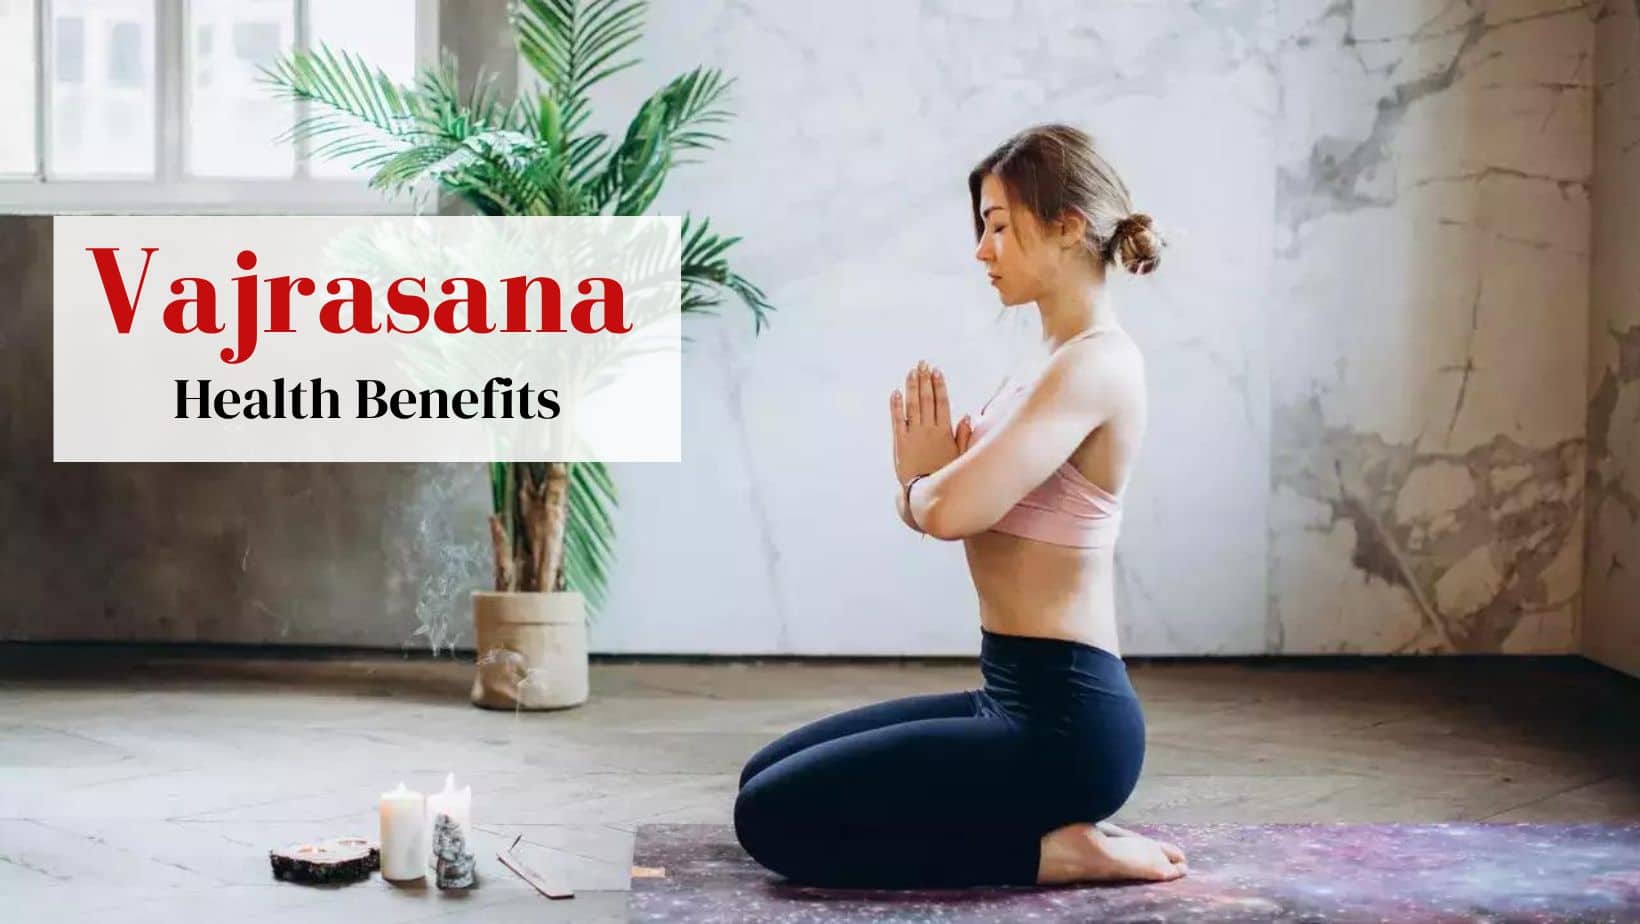 What are the incredible health benefits of sitting in Vajrasana after a  meal? - Quora